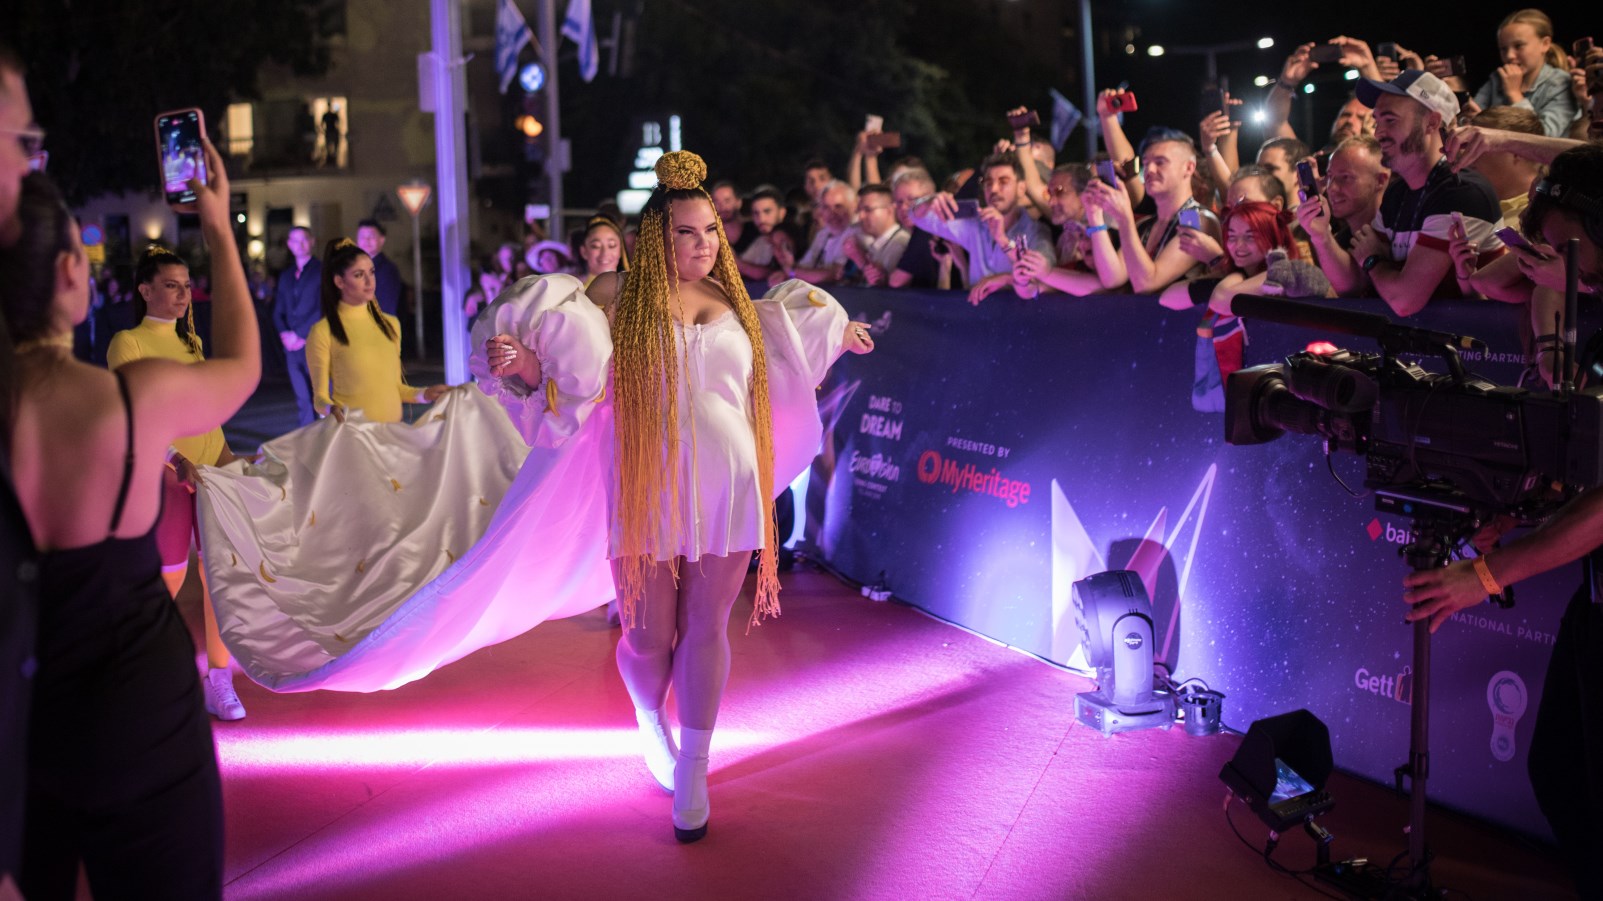 Eurovision 2018 winner Netta Barzilai arrives at the opening event of the 2019 Eurovision Song Contest in Tel Aviv on May 12, 2019. Photo by Hadas Parush/Flash90